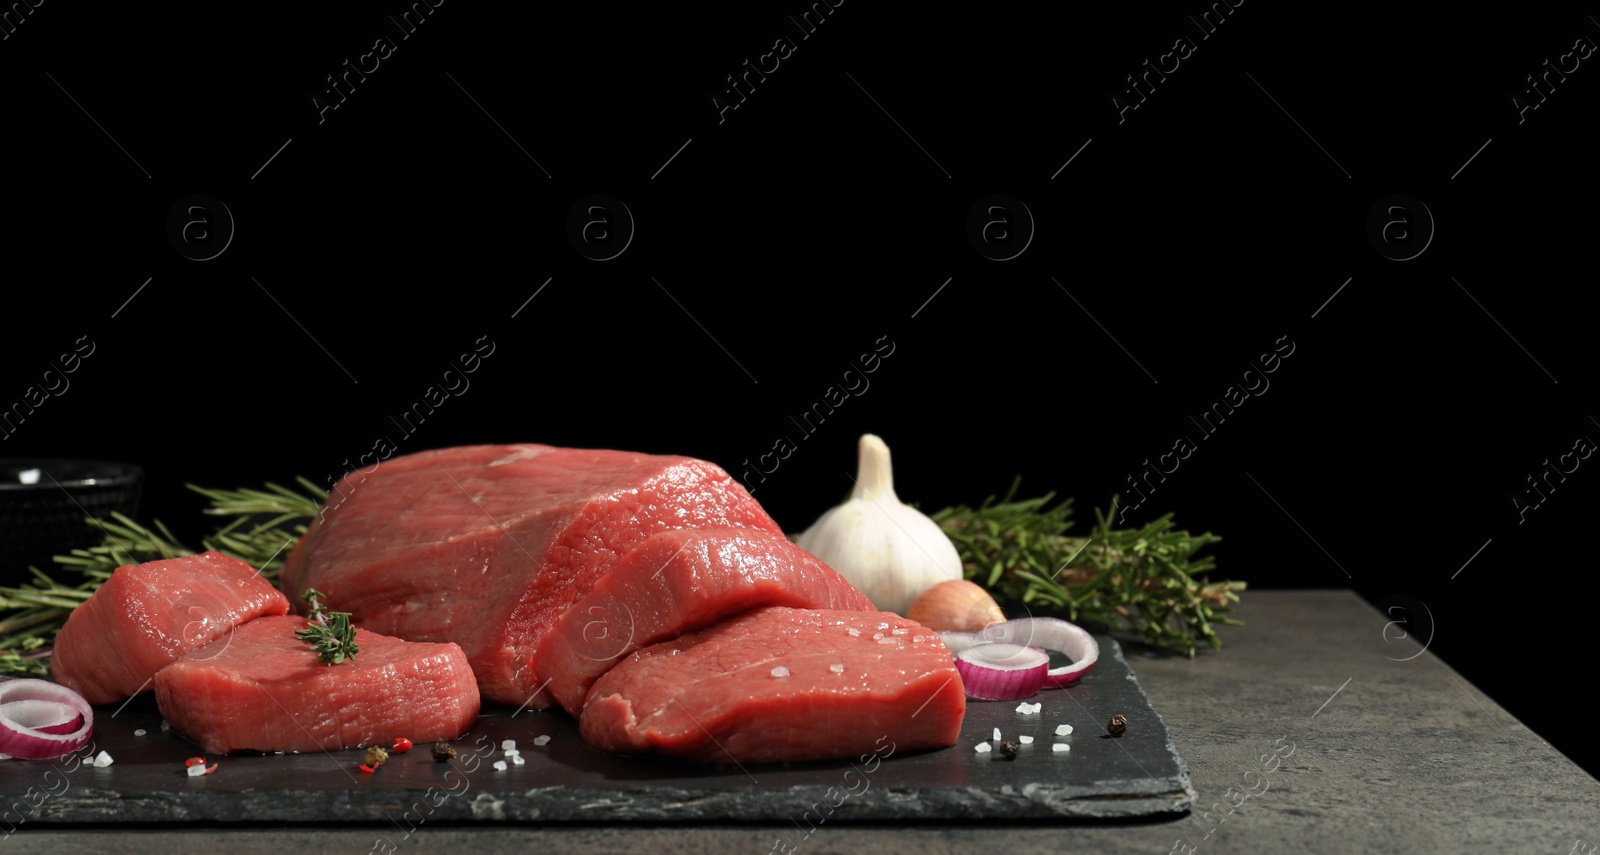 Photo of Slate plate with fresh raw meat on table against dark background